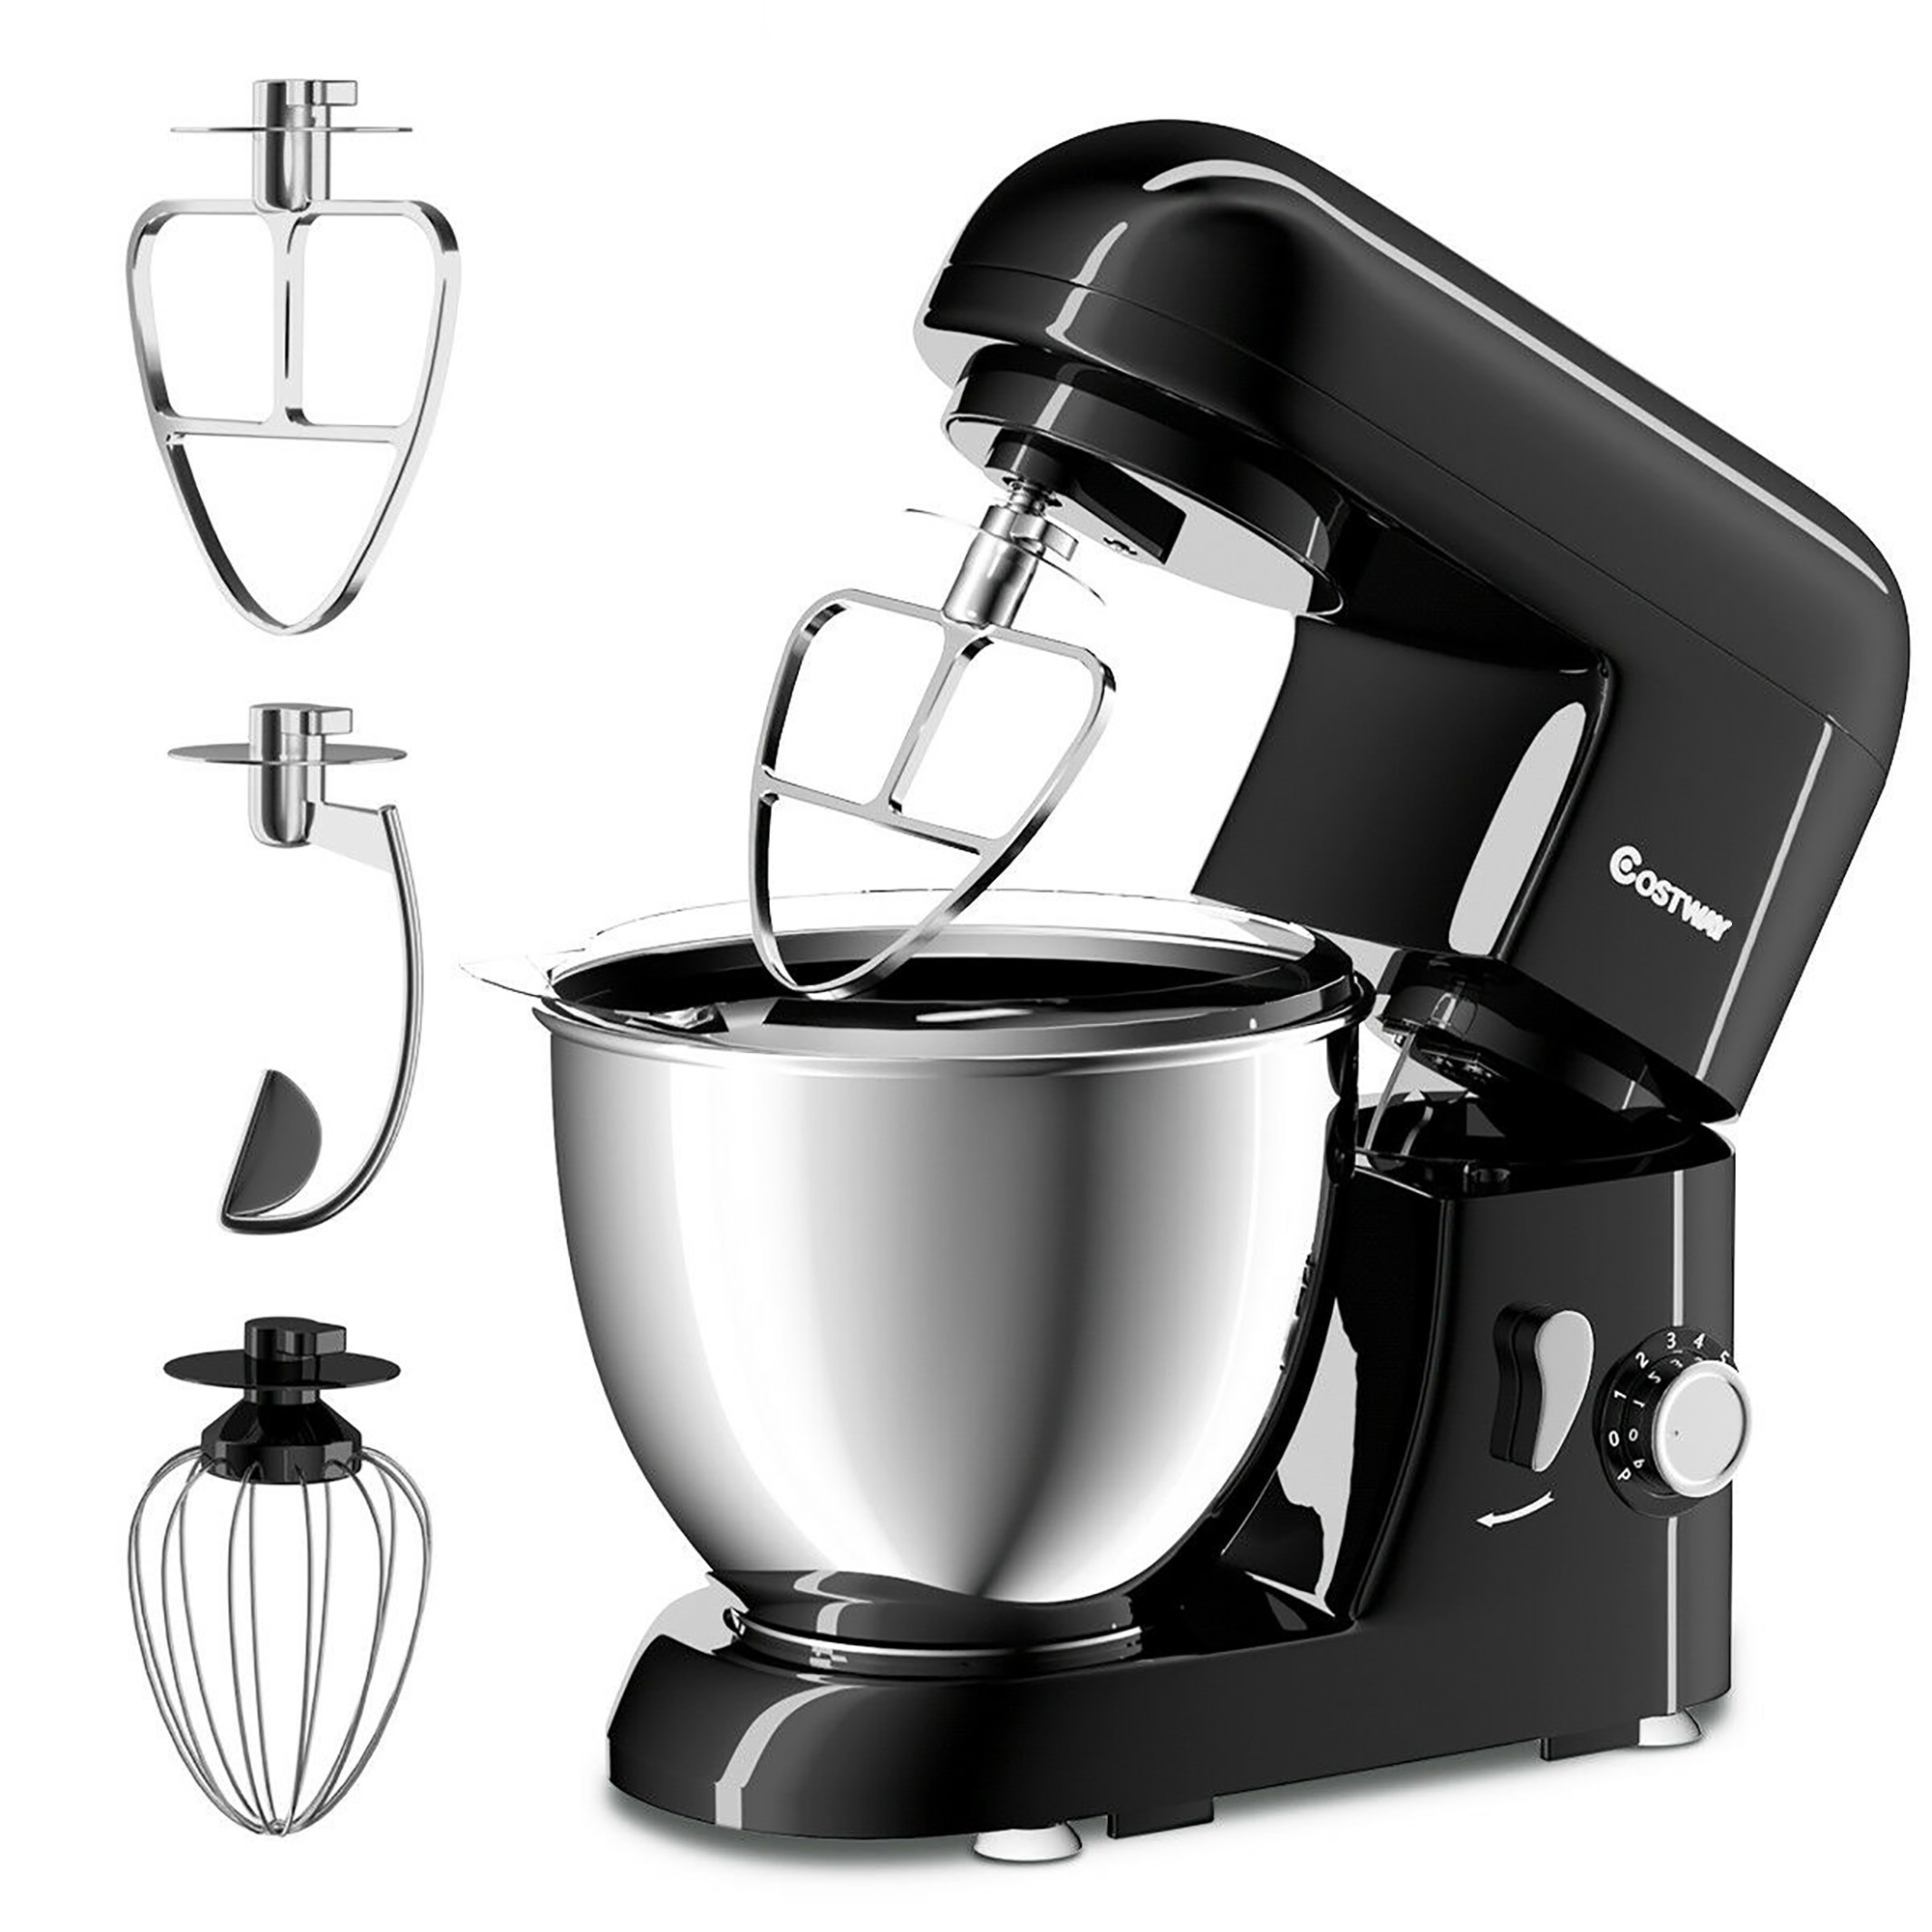 Costway Electric Food Stand Mixer 6 Speed 4.3Qt 550W Tilt-Head Stainless Steel Bowl New - image 1 of 9